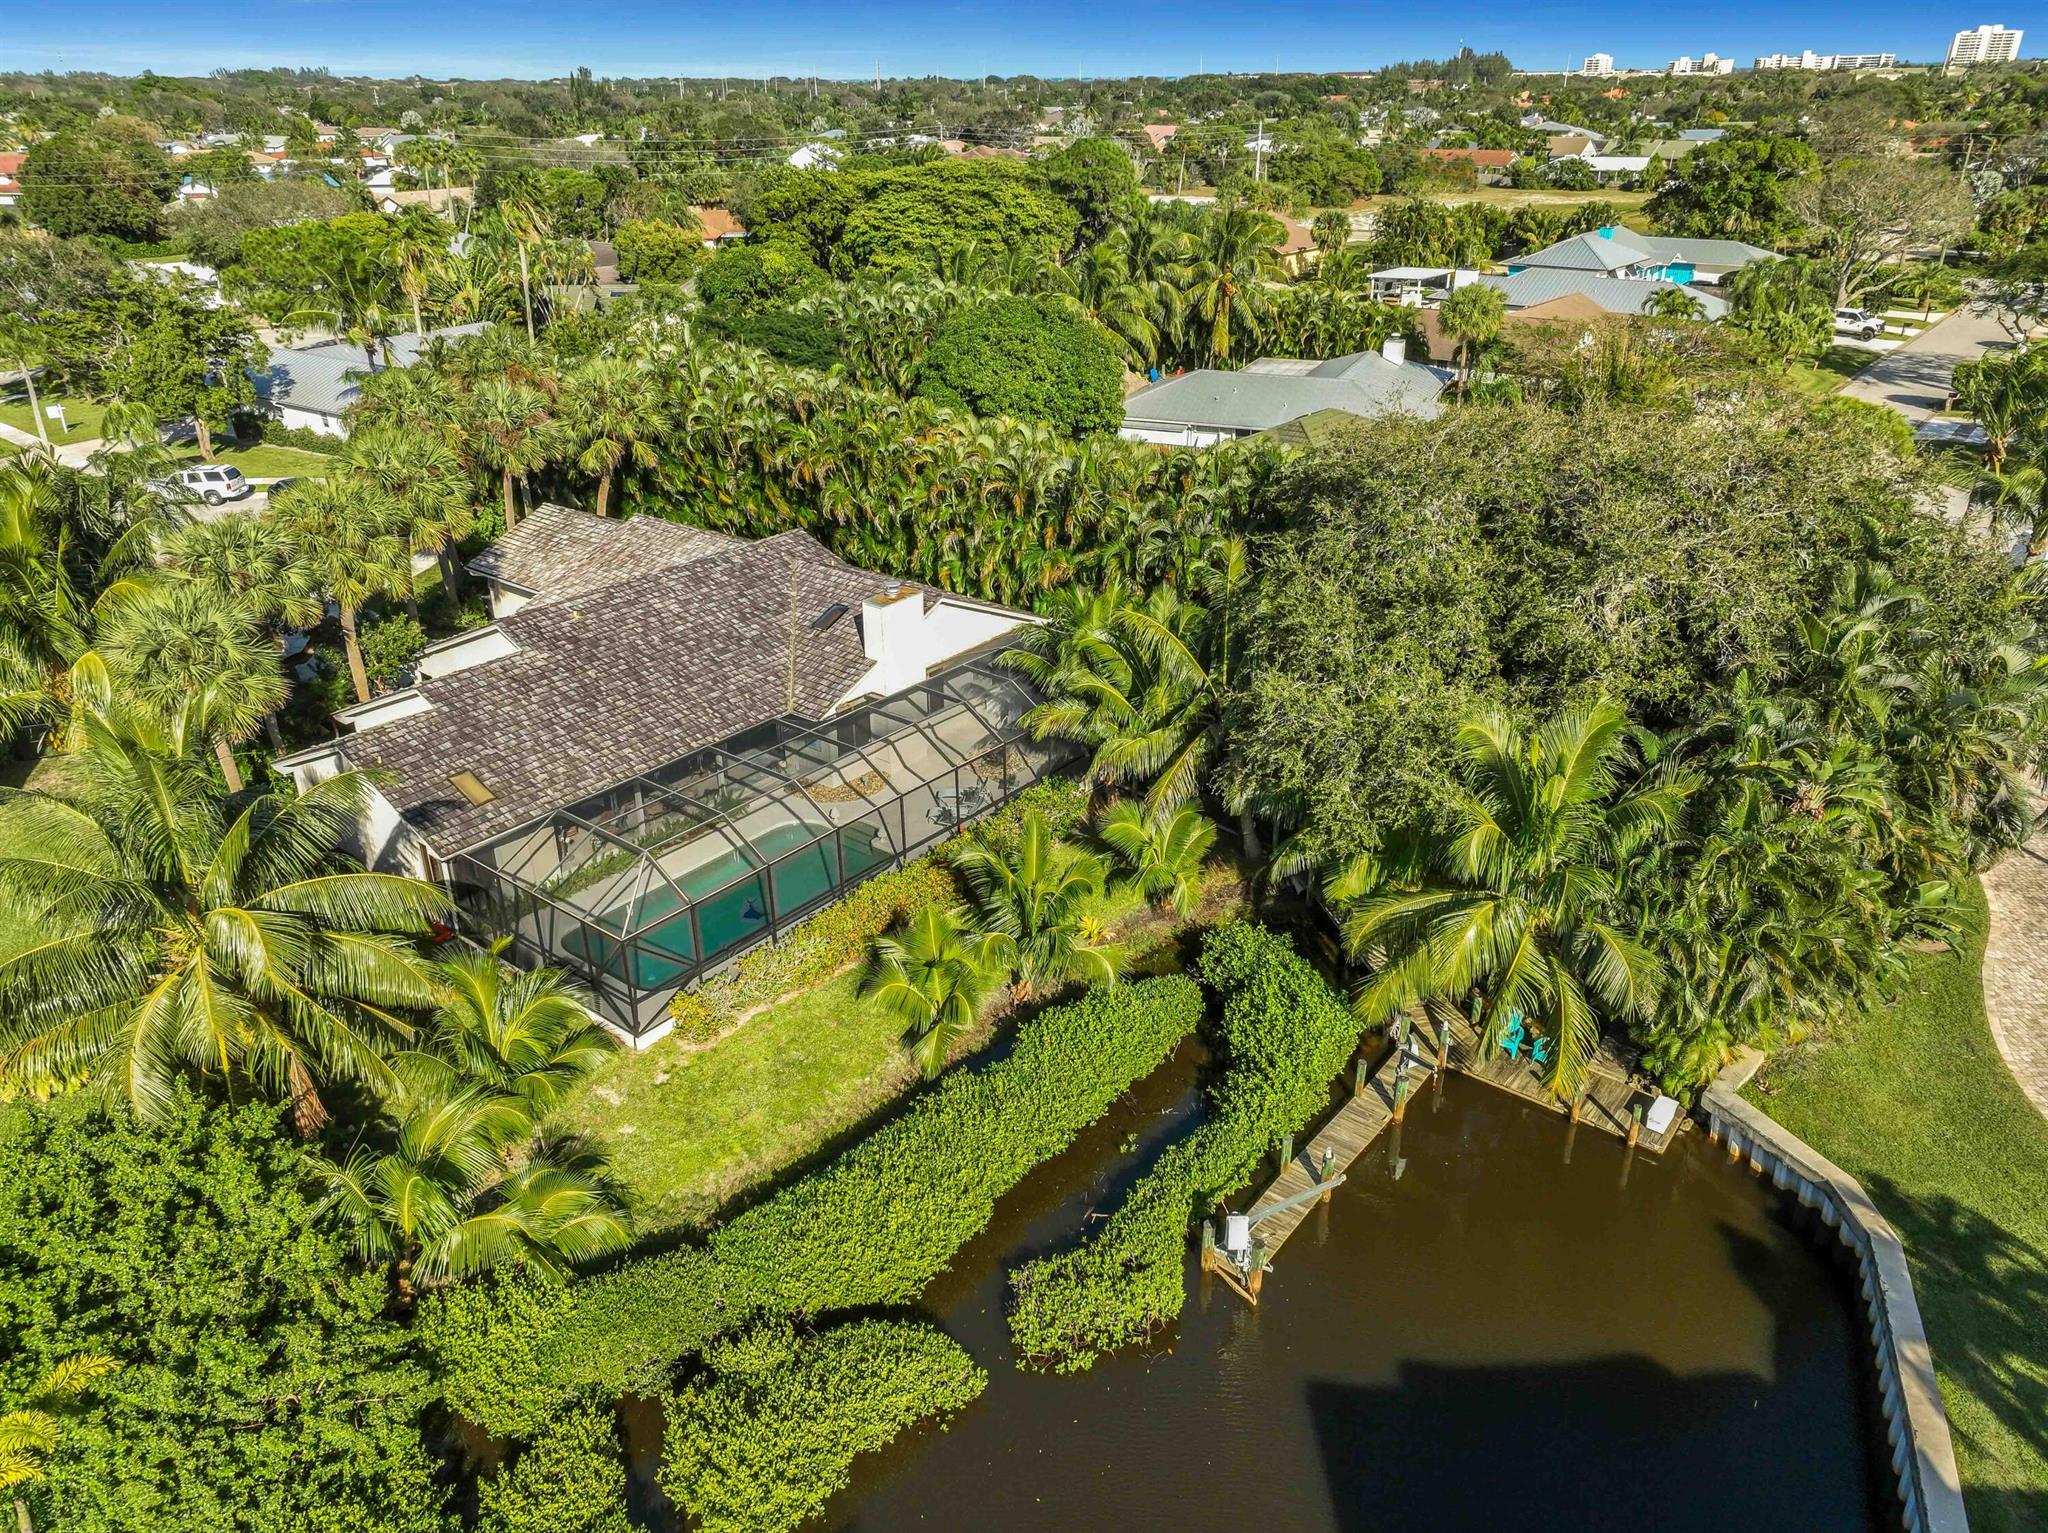 Own a slice of waterfront paradise with this stunning 4-bedroom, 3.5-bathroom single-family pool home, boasting direct ocean access from your backyard! This .46 acre opportunity screams possibilities: expand up to an additional 4,000 sq.ft., customize, or simply relish the tranquility that Tequesta has to offer. Oak shake and cedar siding blend seamlessly with the lush greenery, while the natural wood interior and cozy fireplace create a warm and inviting atmosphere. Vaulted ceilings, split floor plan and panoramic views to your backyard oasis are key features to the bones of this home. Whether you're expanding your family or retiring, Tequesta has it all; top-rated schools, restaurants & nightlife, golf courses, and close proximity to beaches, parks, and things to do!